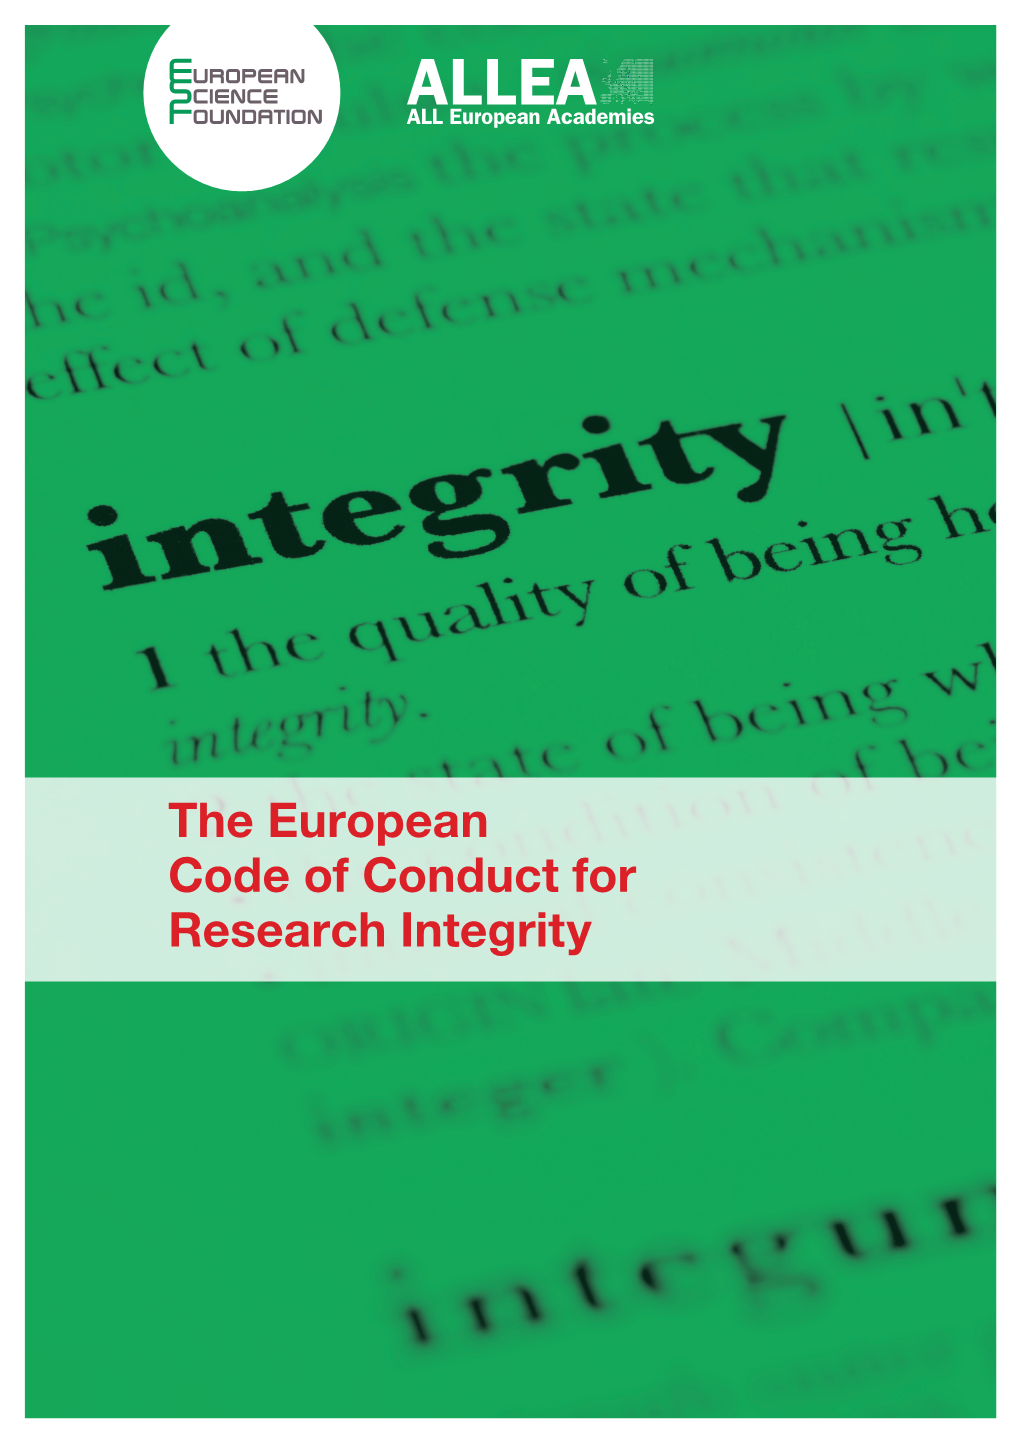 The European Code of Conduct for Research Integrity